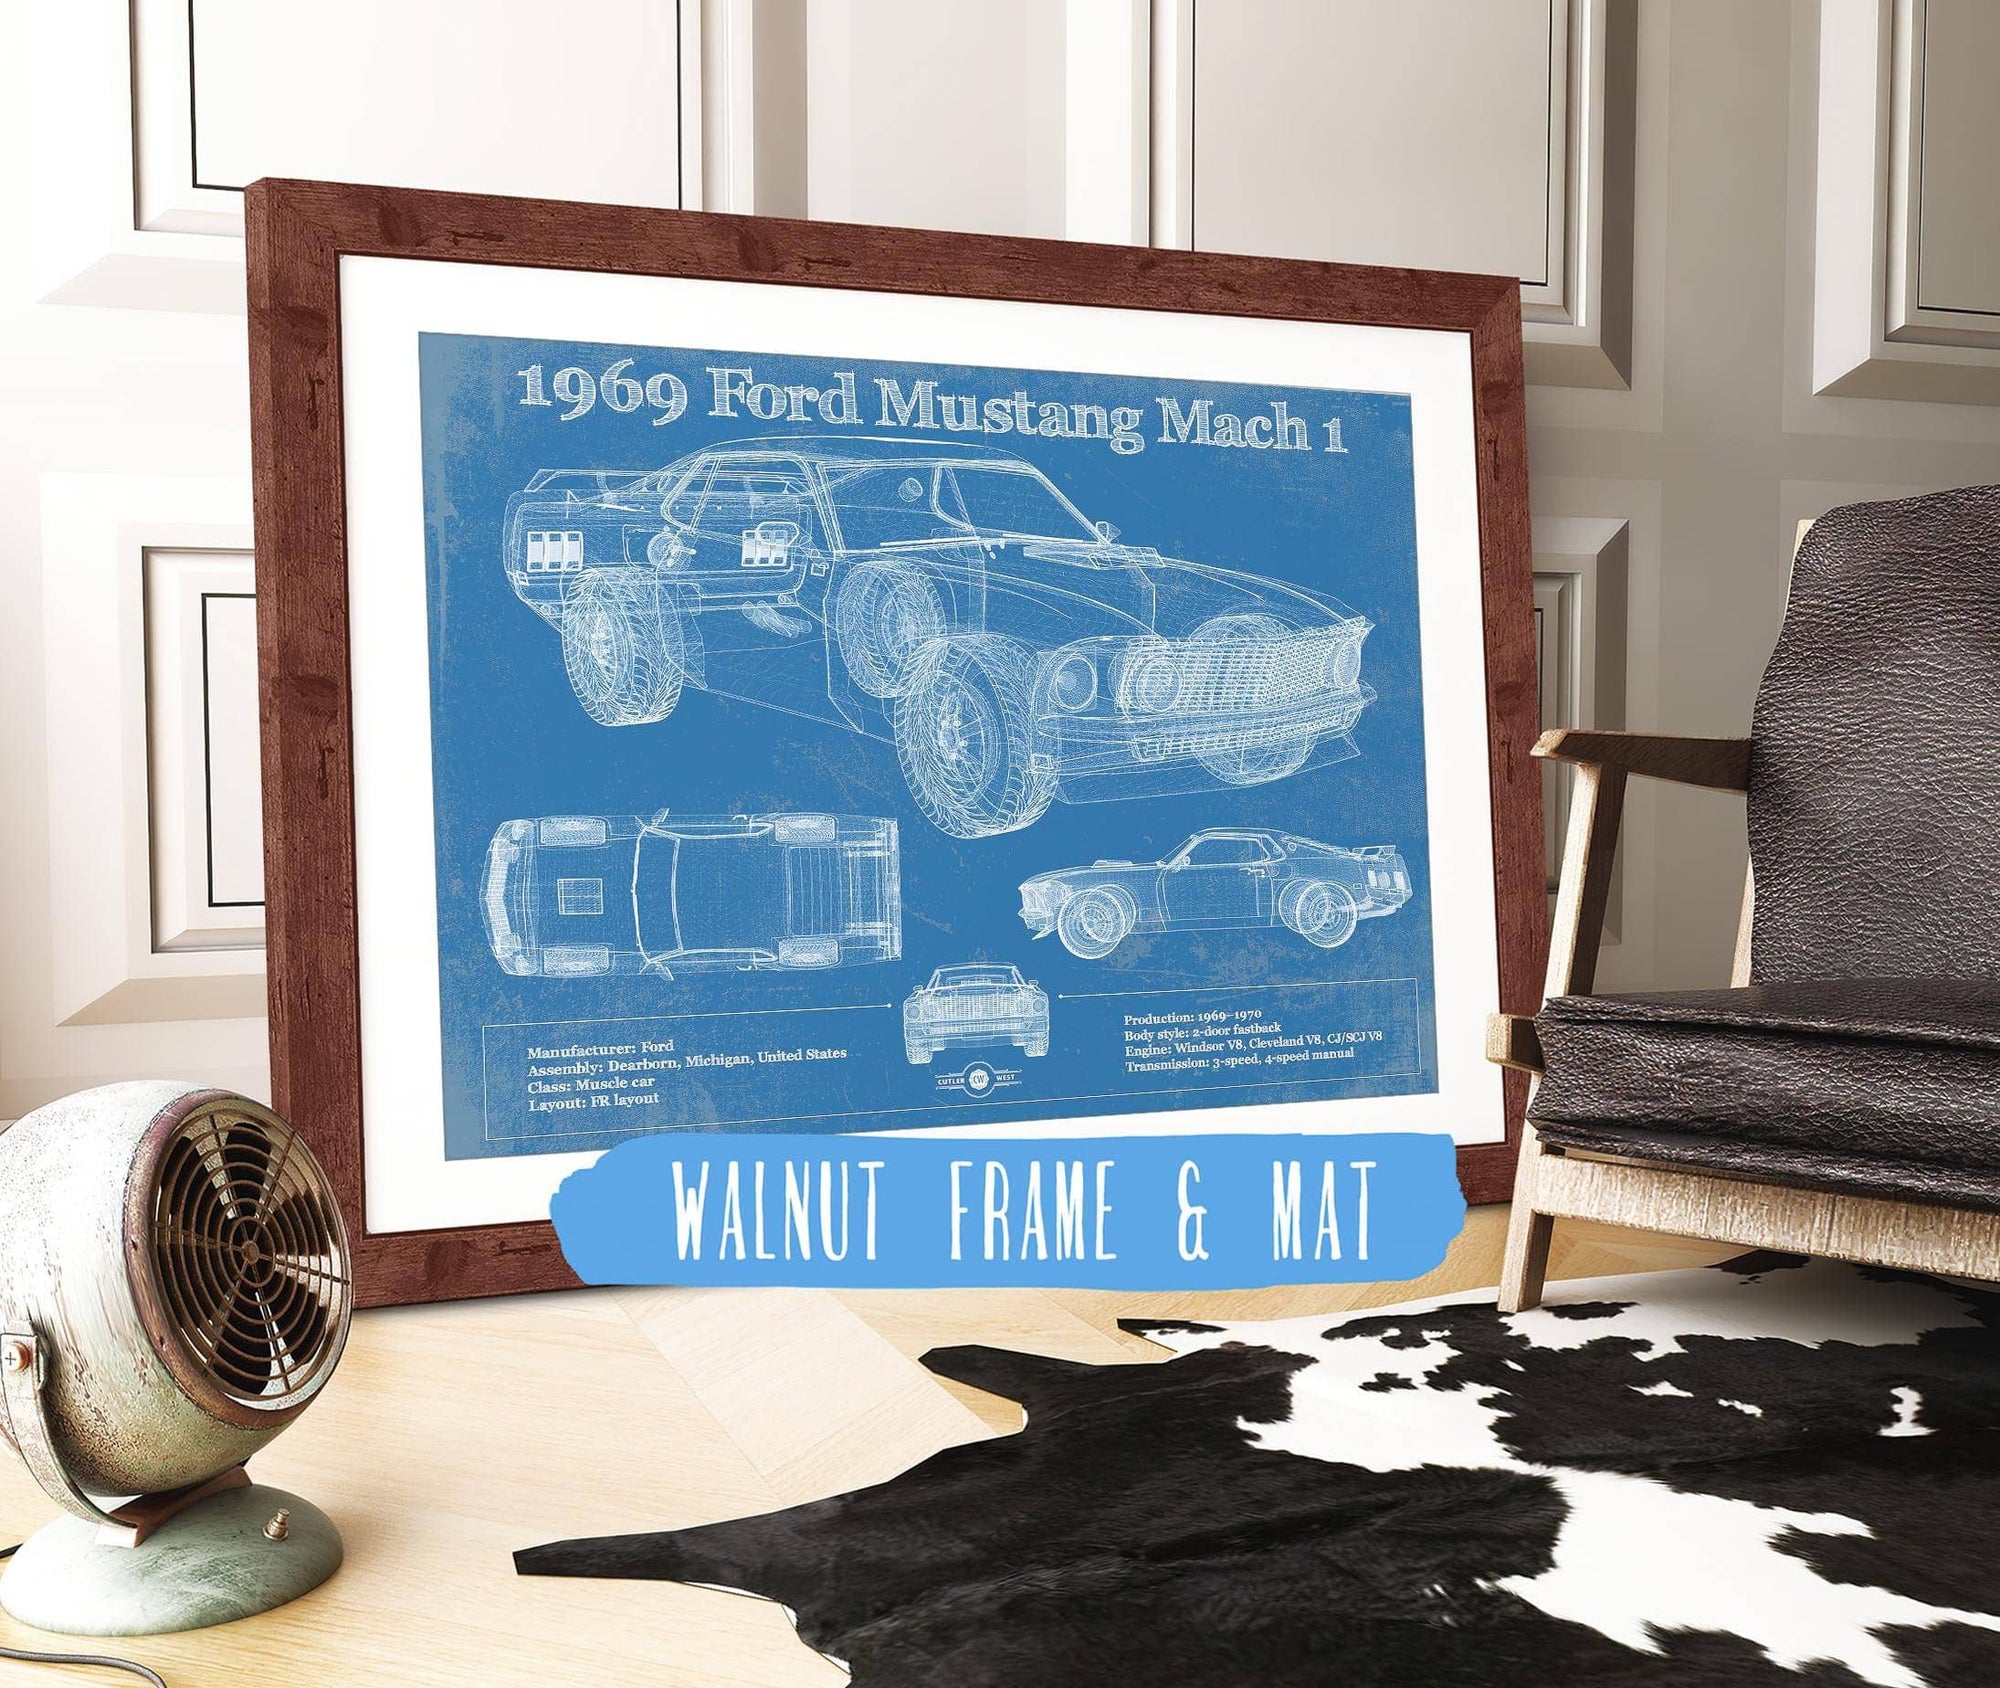 Cutler West Ford Collection 14" x 11" / Walnut Frame & Mat 1969 Ford Mustang Mach 1 Vintage Blueprint Auto Print 833110166_42075